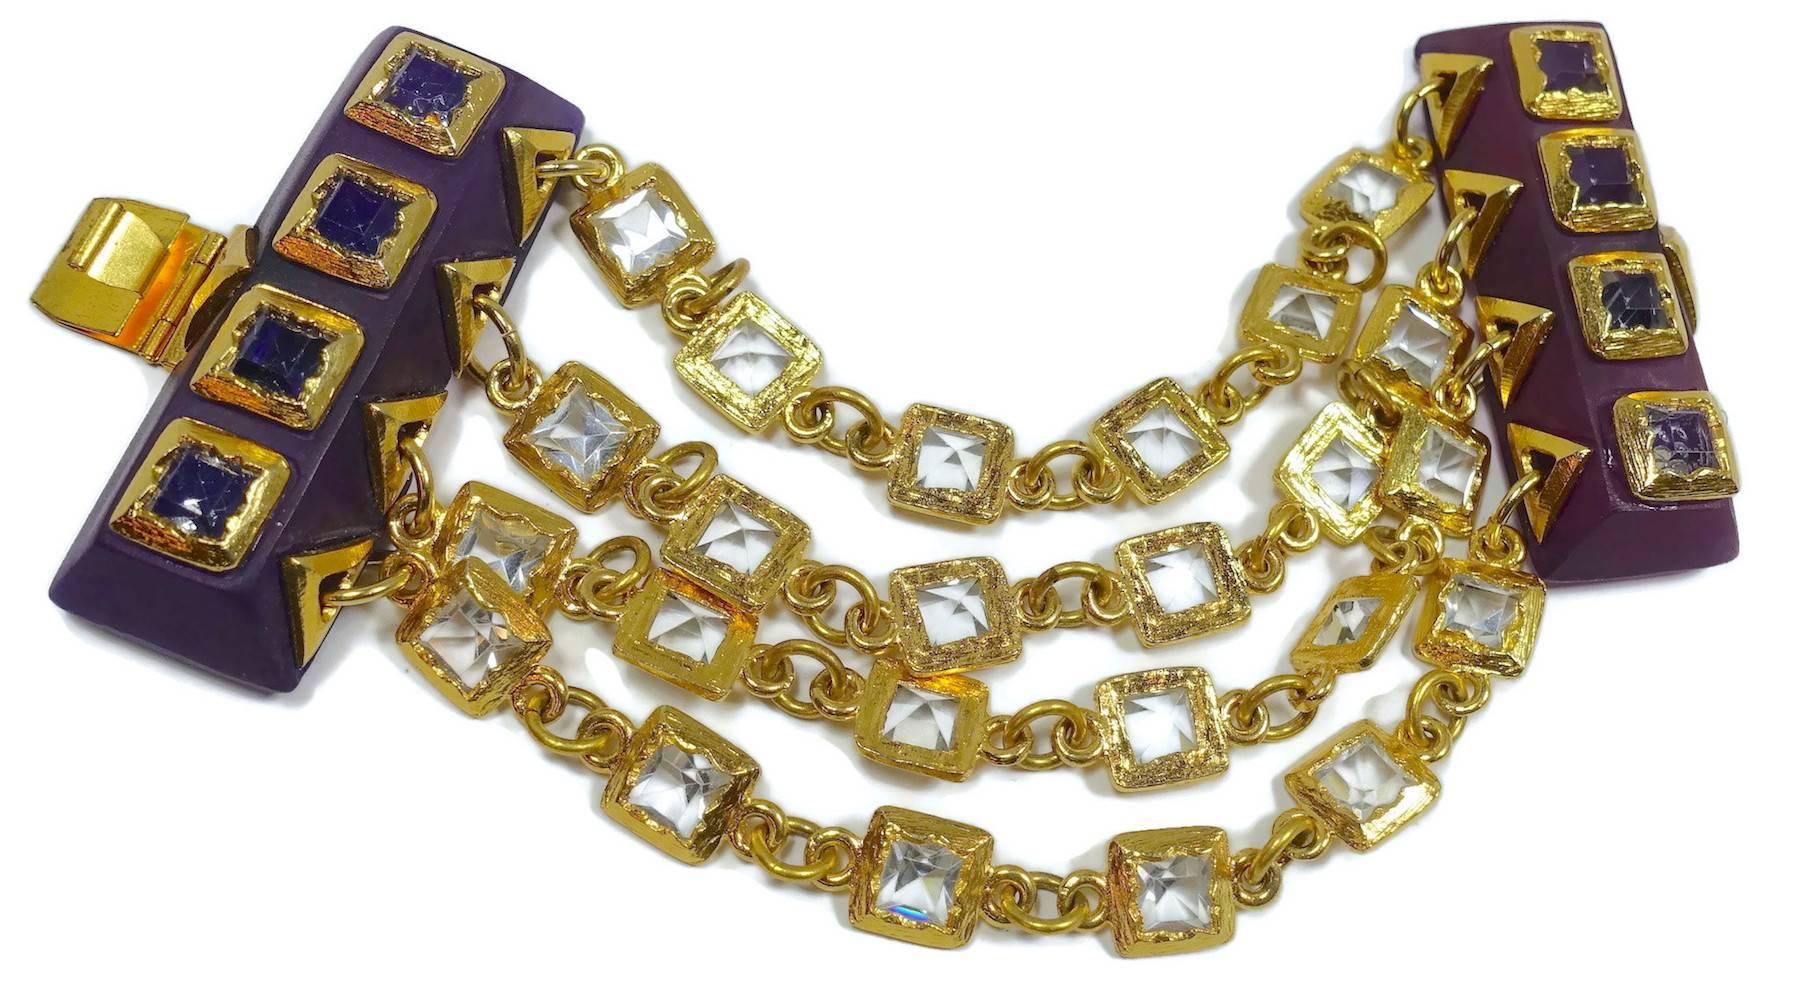 This vintage unusual 1970s bracelet features 4 strands of clear crystals, joined at each end by a purple wood closure with amethyst crystal accents, all in a gold-plated base metal setting.  This bracelet measures 7-1/2” x 2-1/2” with a slide-in